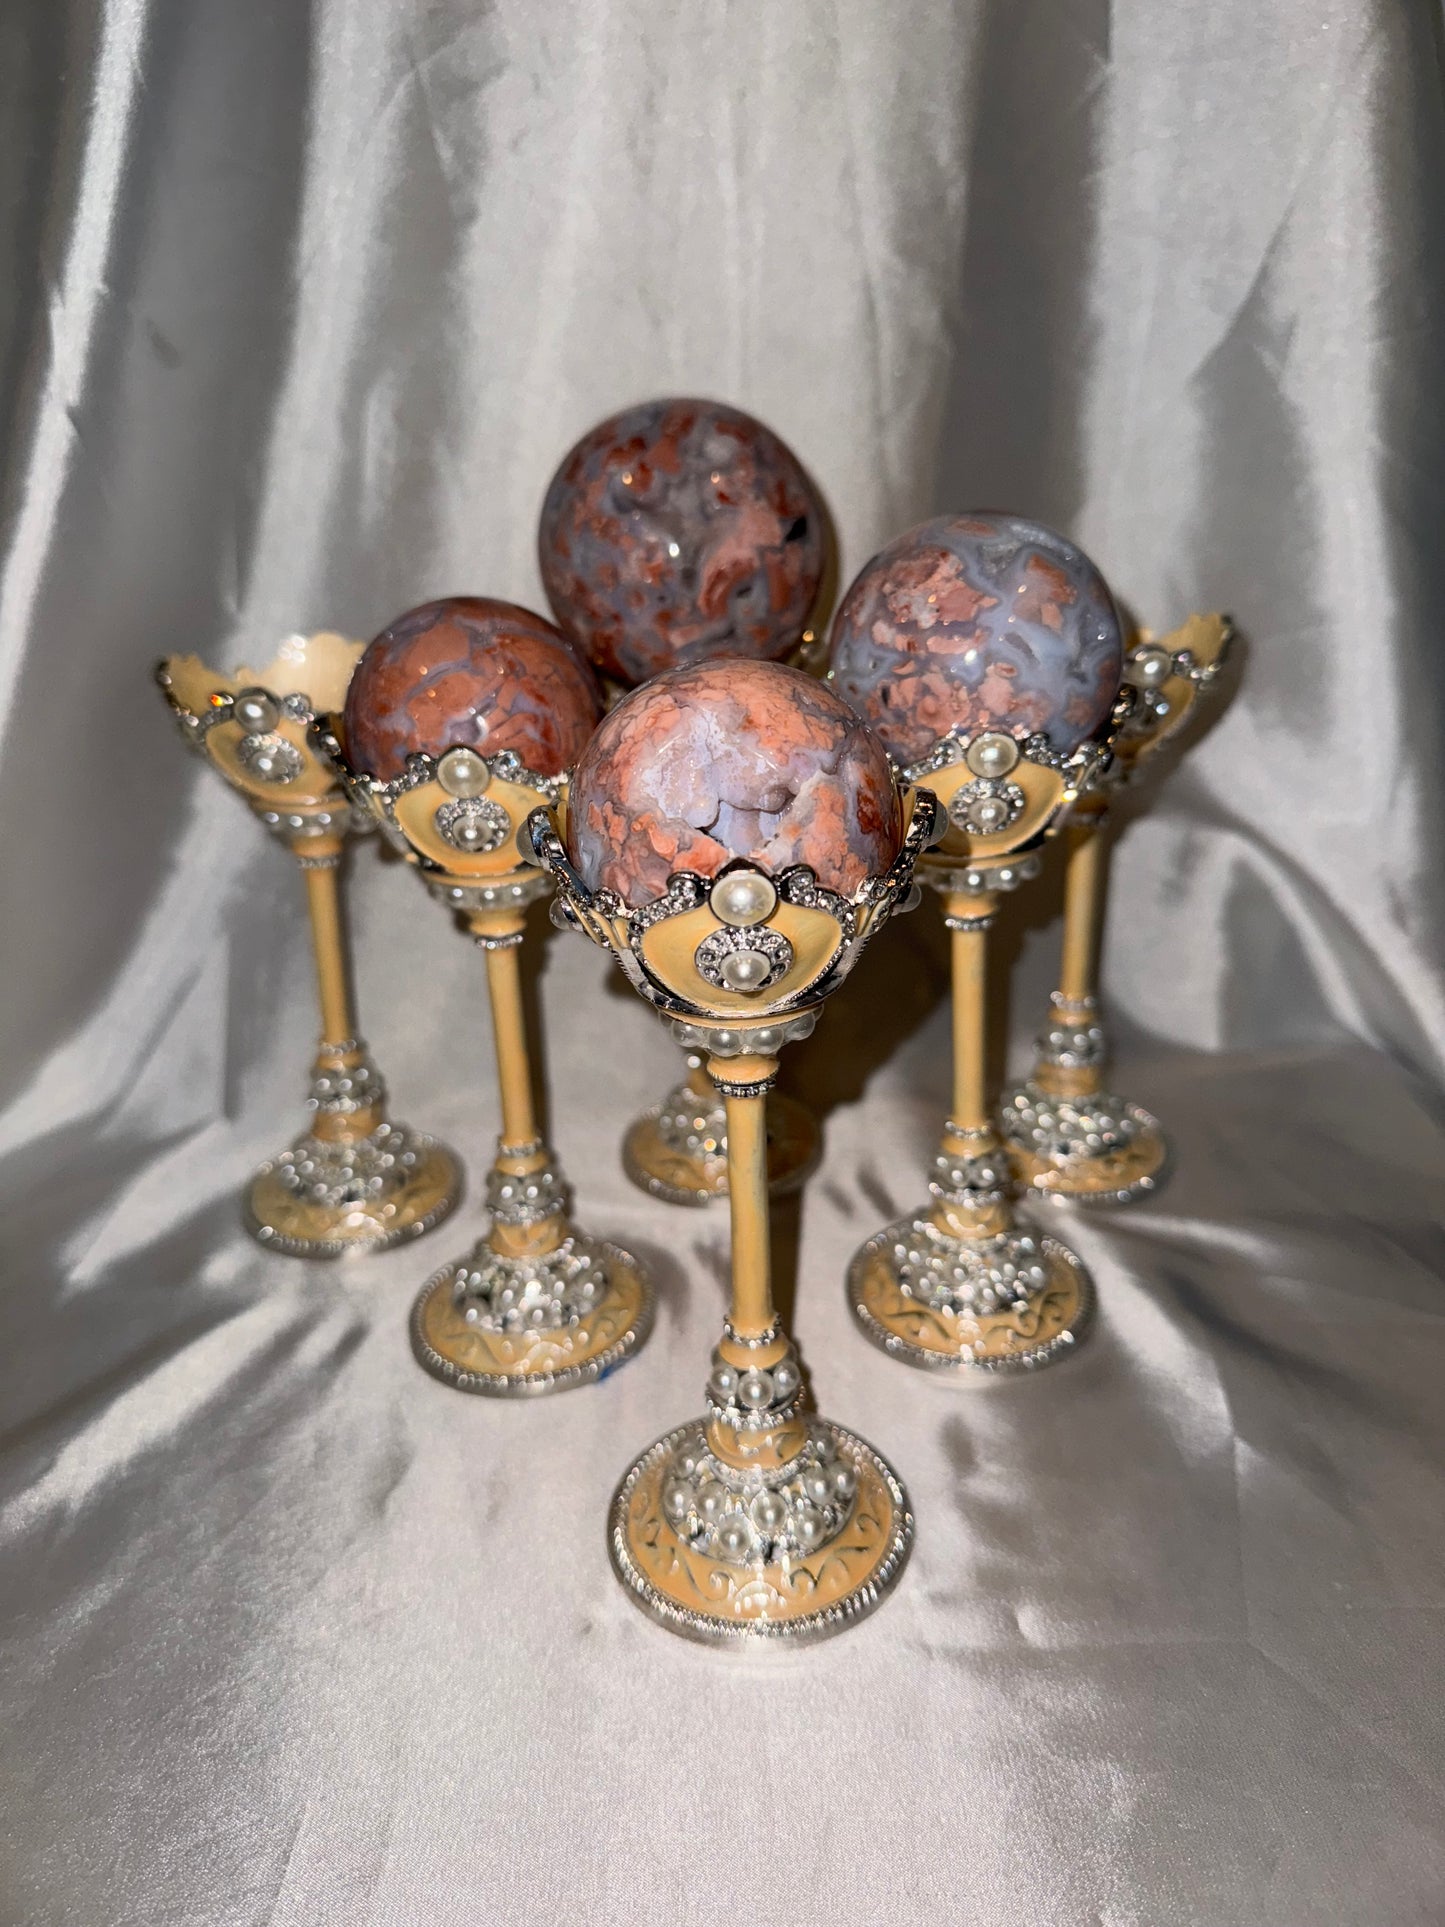 Detailed Sphere Stand